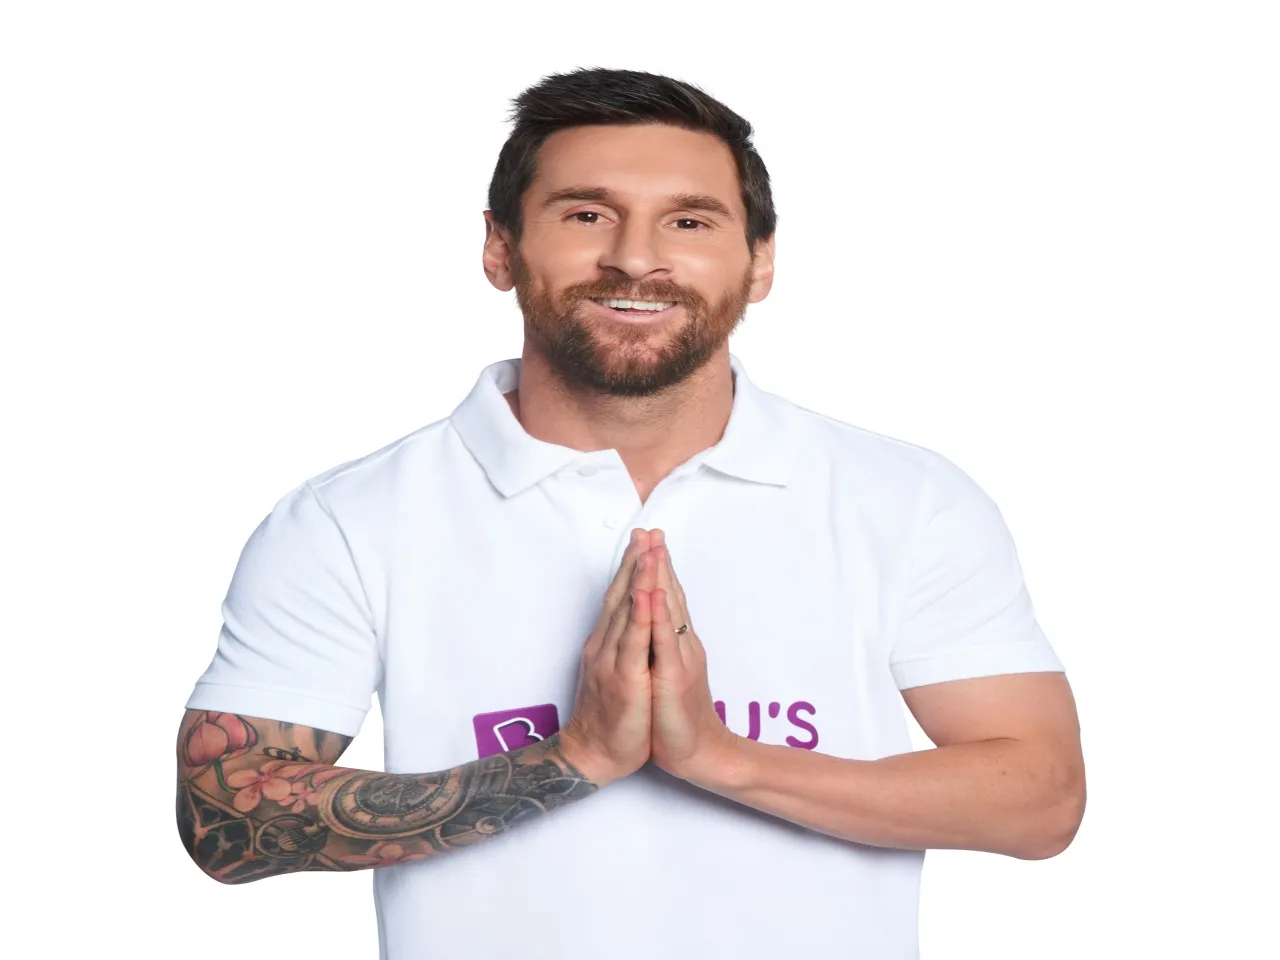 Messi's Namaste: Byju's looks to cash in on Football star's popularity to reach youth